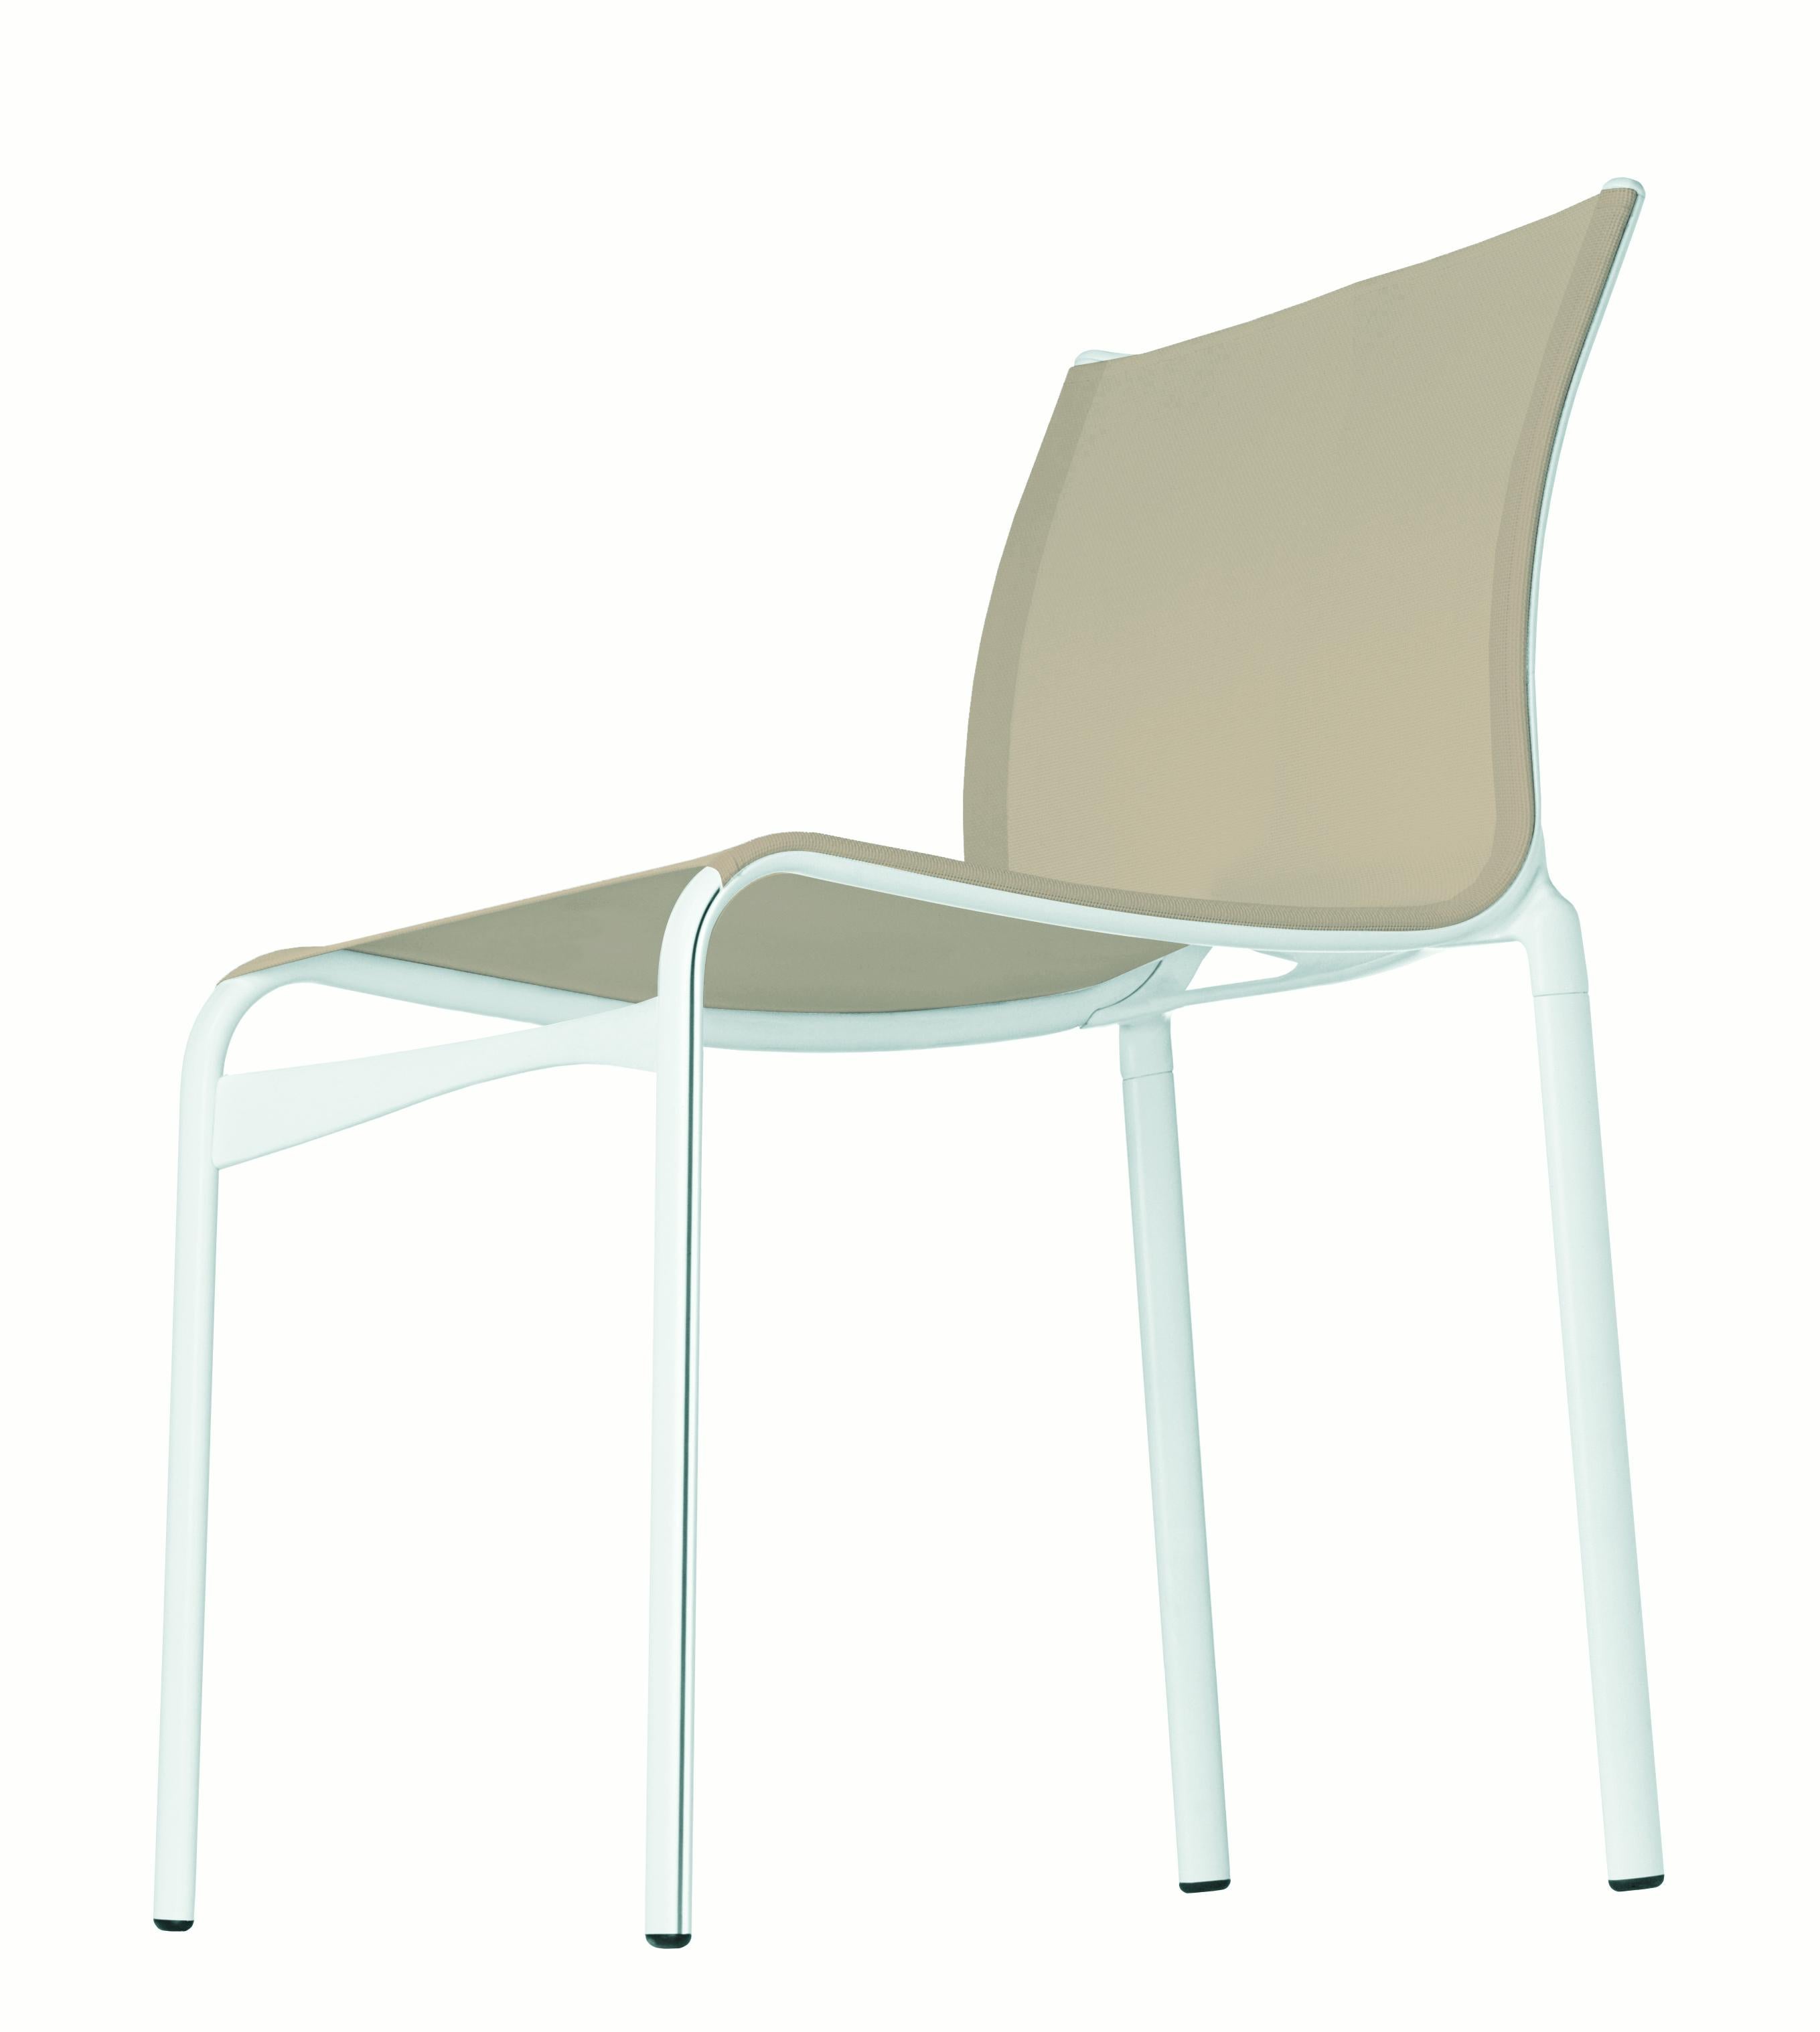 Alias Frame 52 Chair in Sand Mesh Seat with White Lacquered Aluminium Frame by Alberto Meda

Stacking chair with structure made of extruded aluminium profile and die-cast aluminium elements, seat and back in fire retardant PVC covered polyester